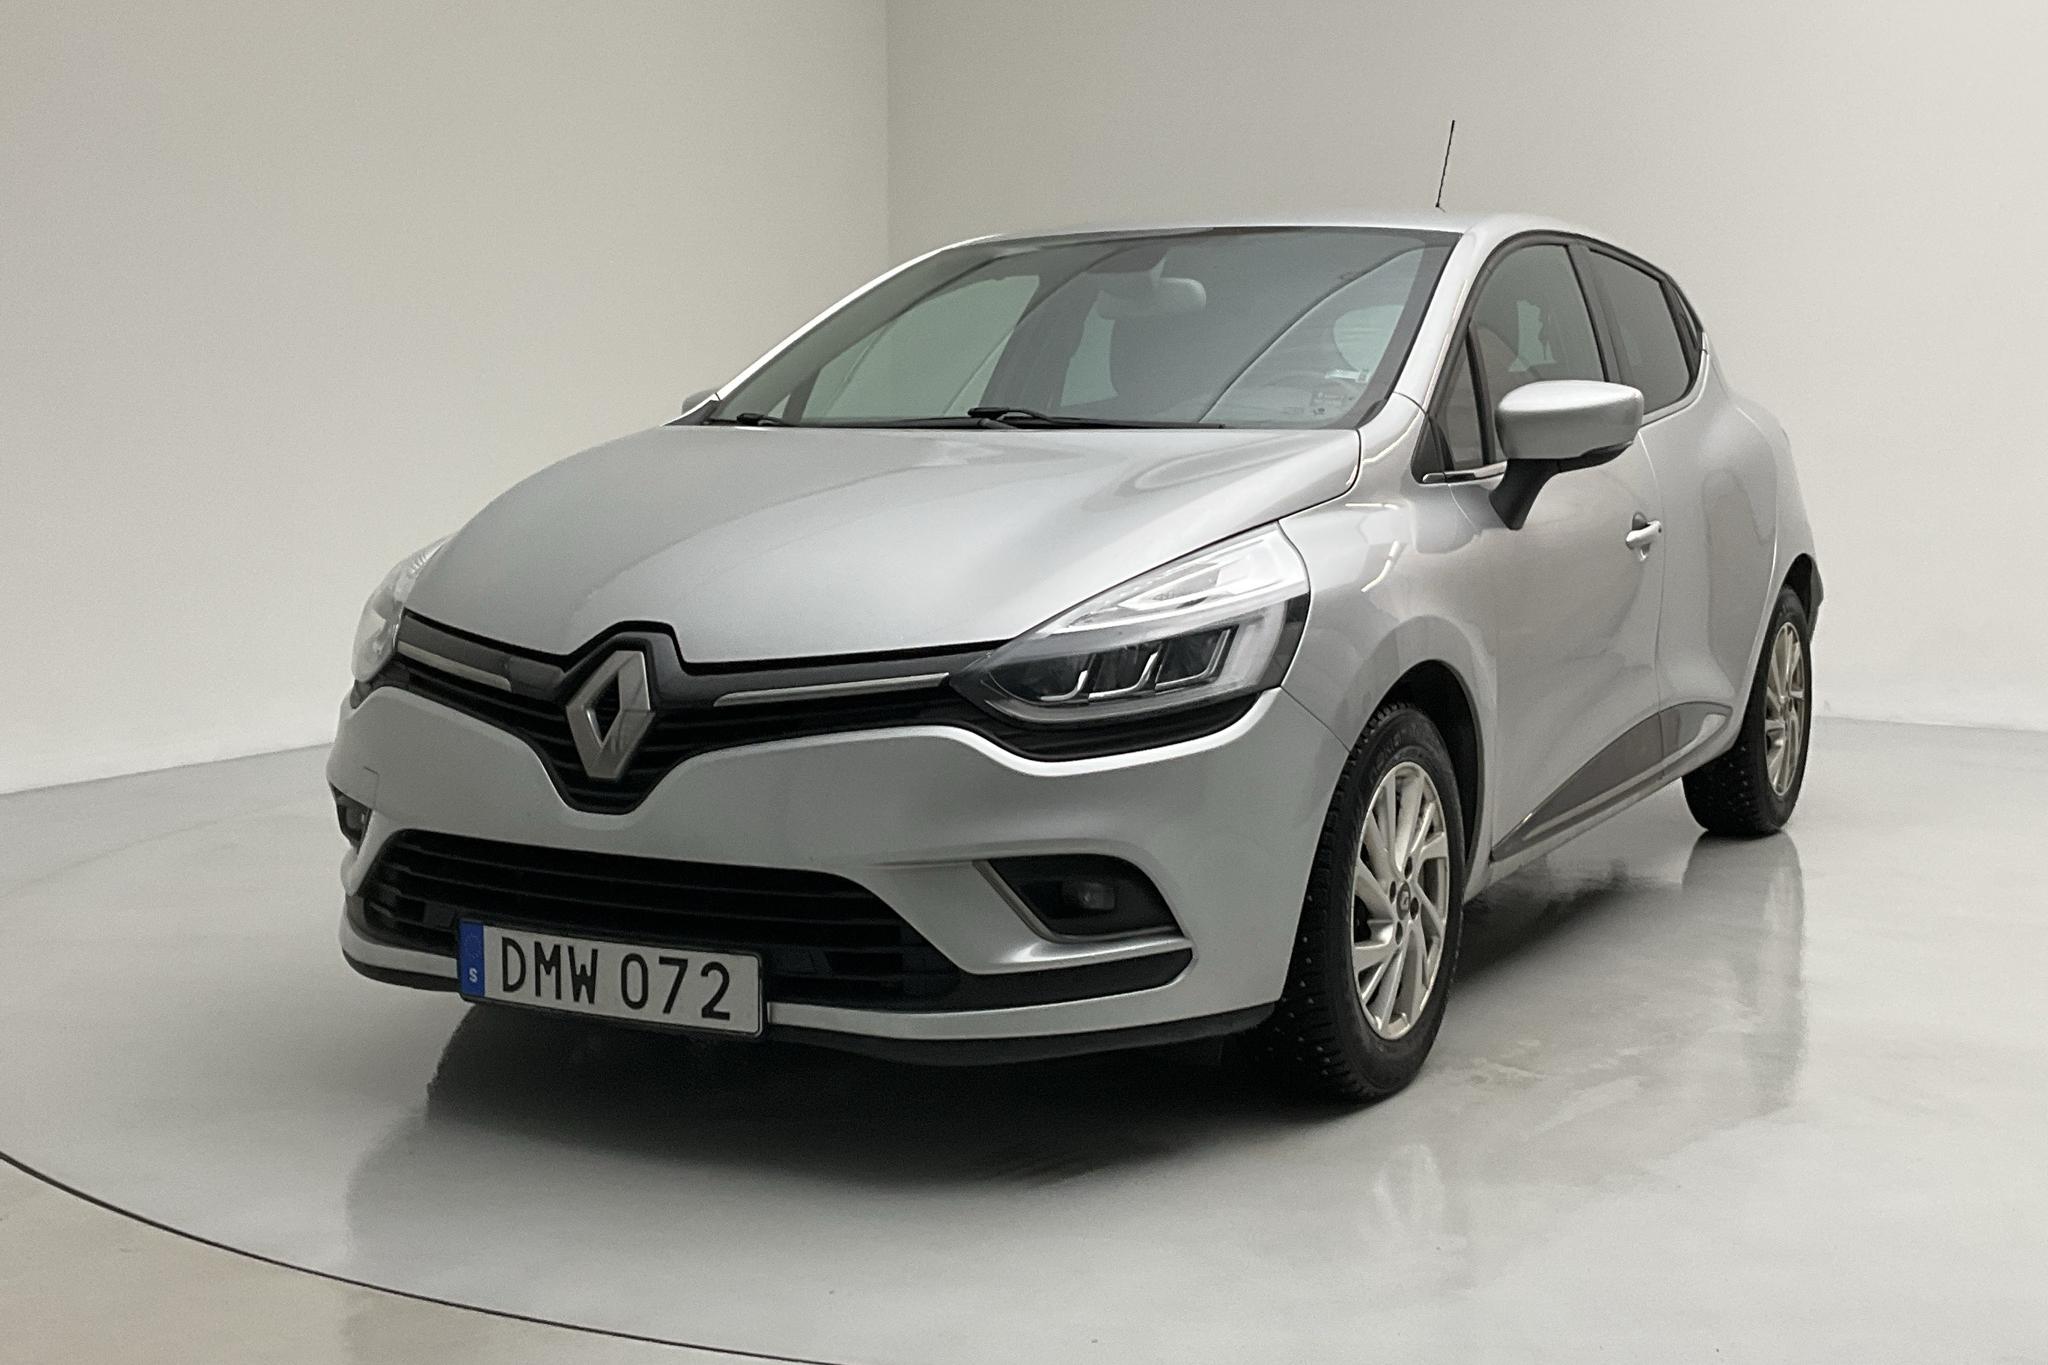 Renault Clio IV 0.9 TCe 90 5dr (90hk) - 6 508 mil - Manuell - silver - 2018